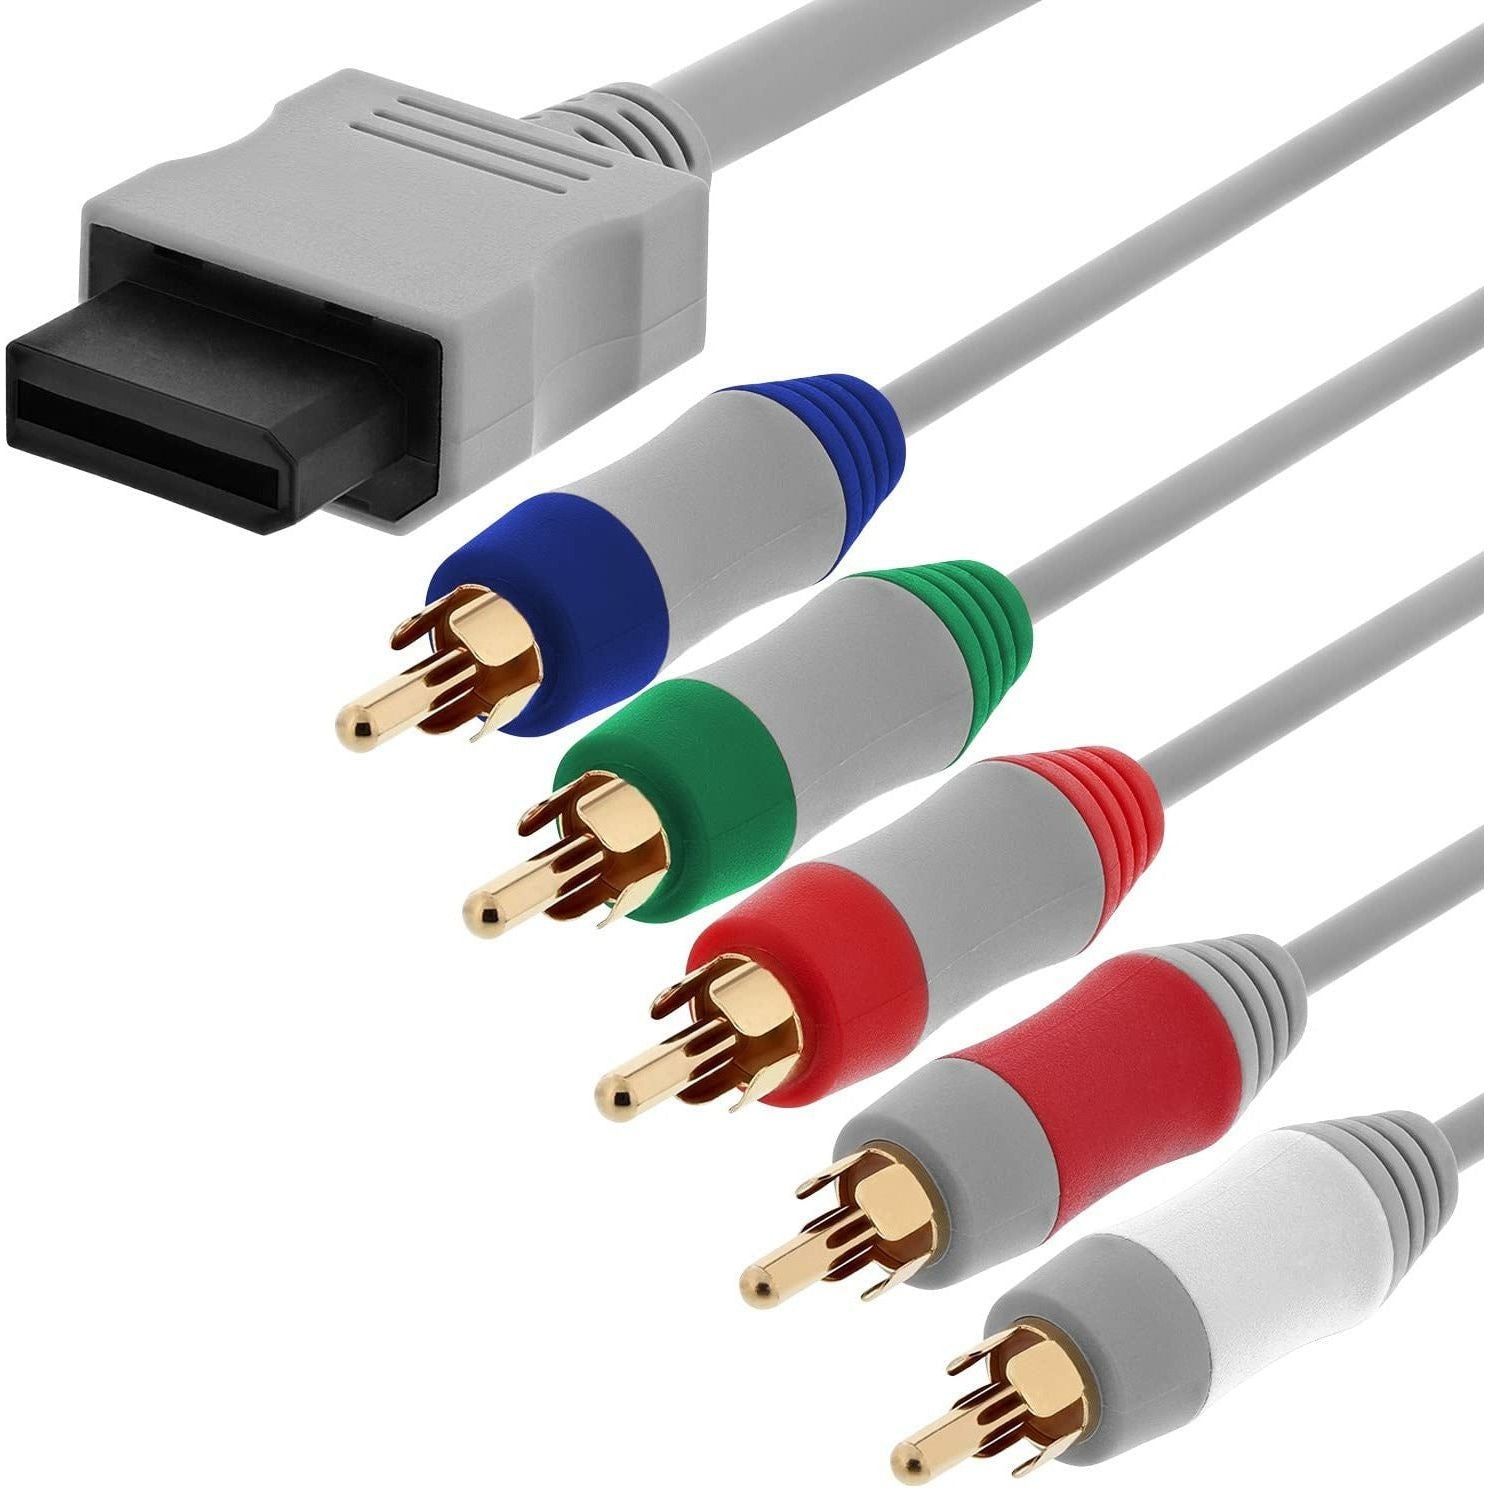 Nintendo Wii / Wii U HD Component Video Cable